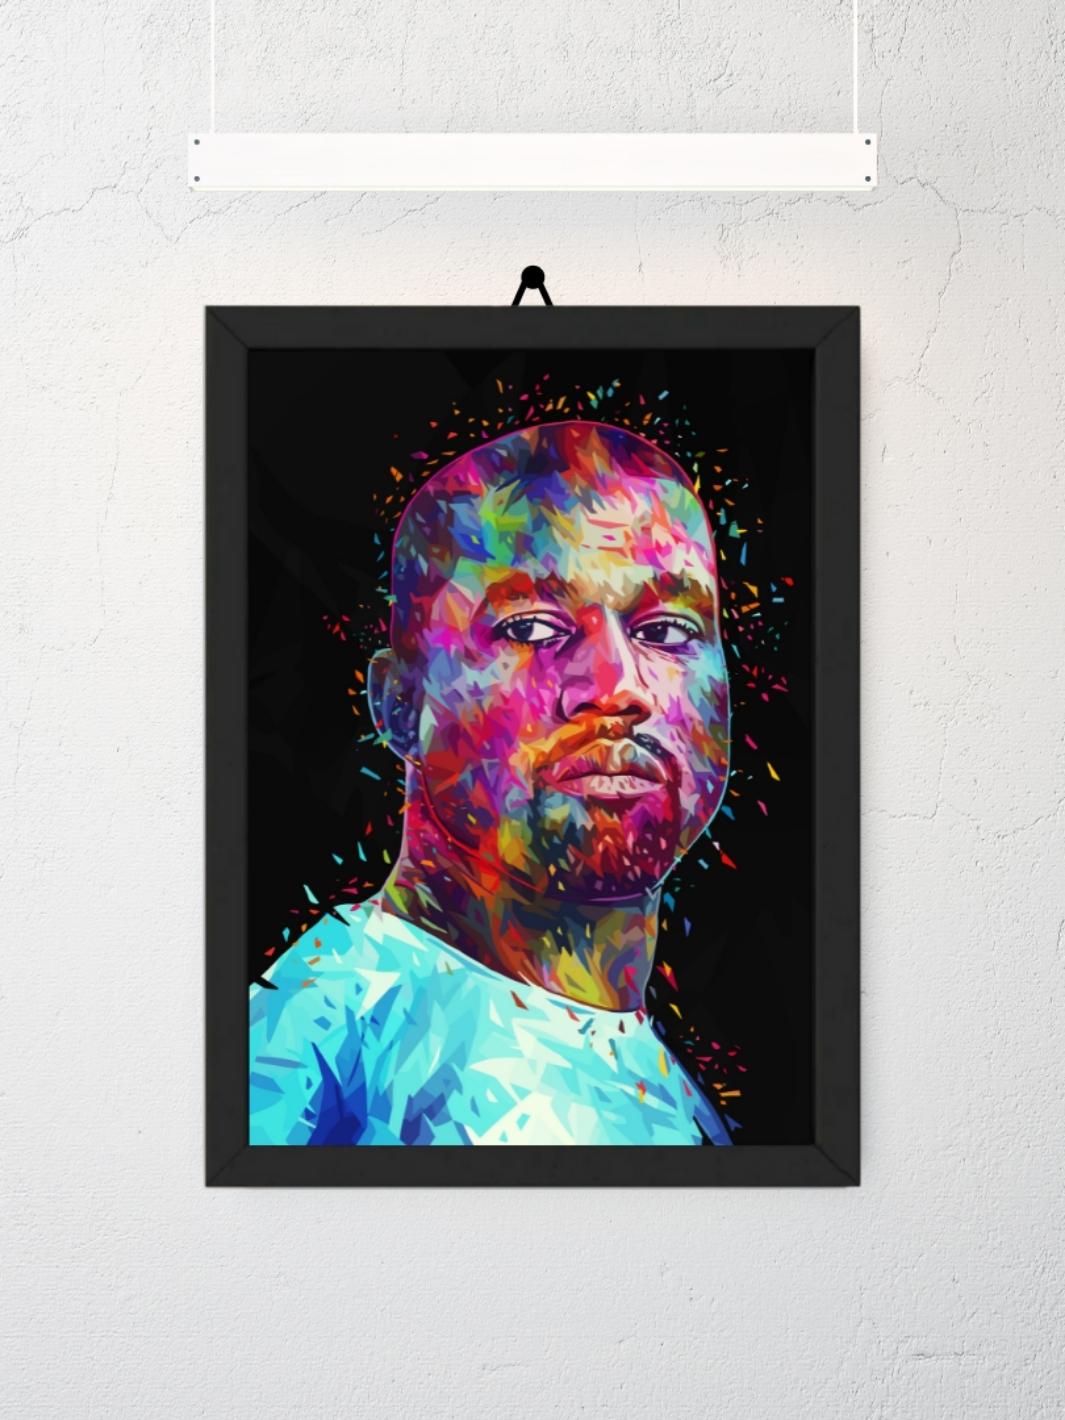 Poster Kanye West by Alessandro Pautasso.